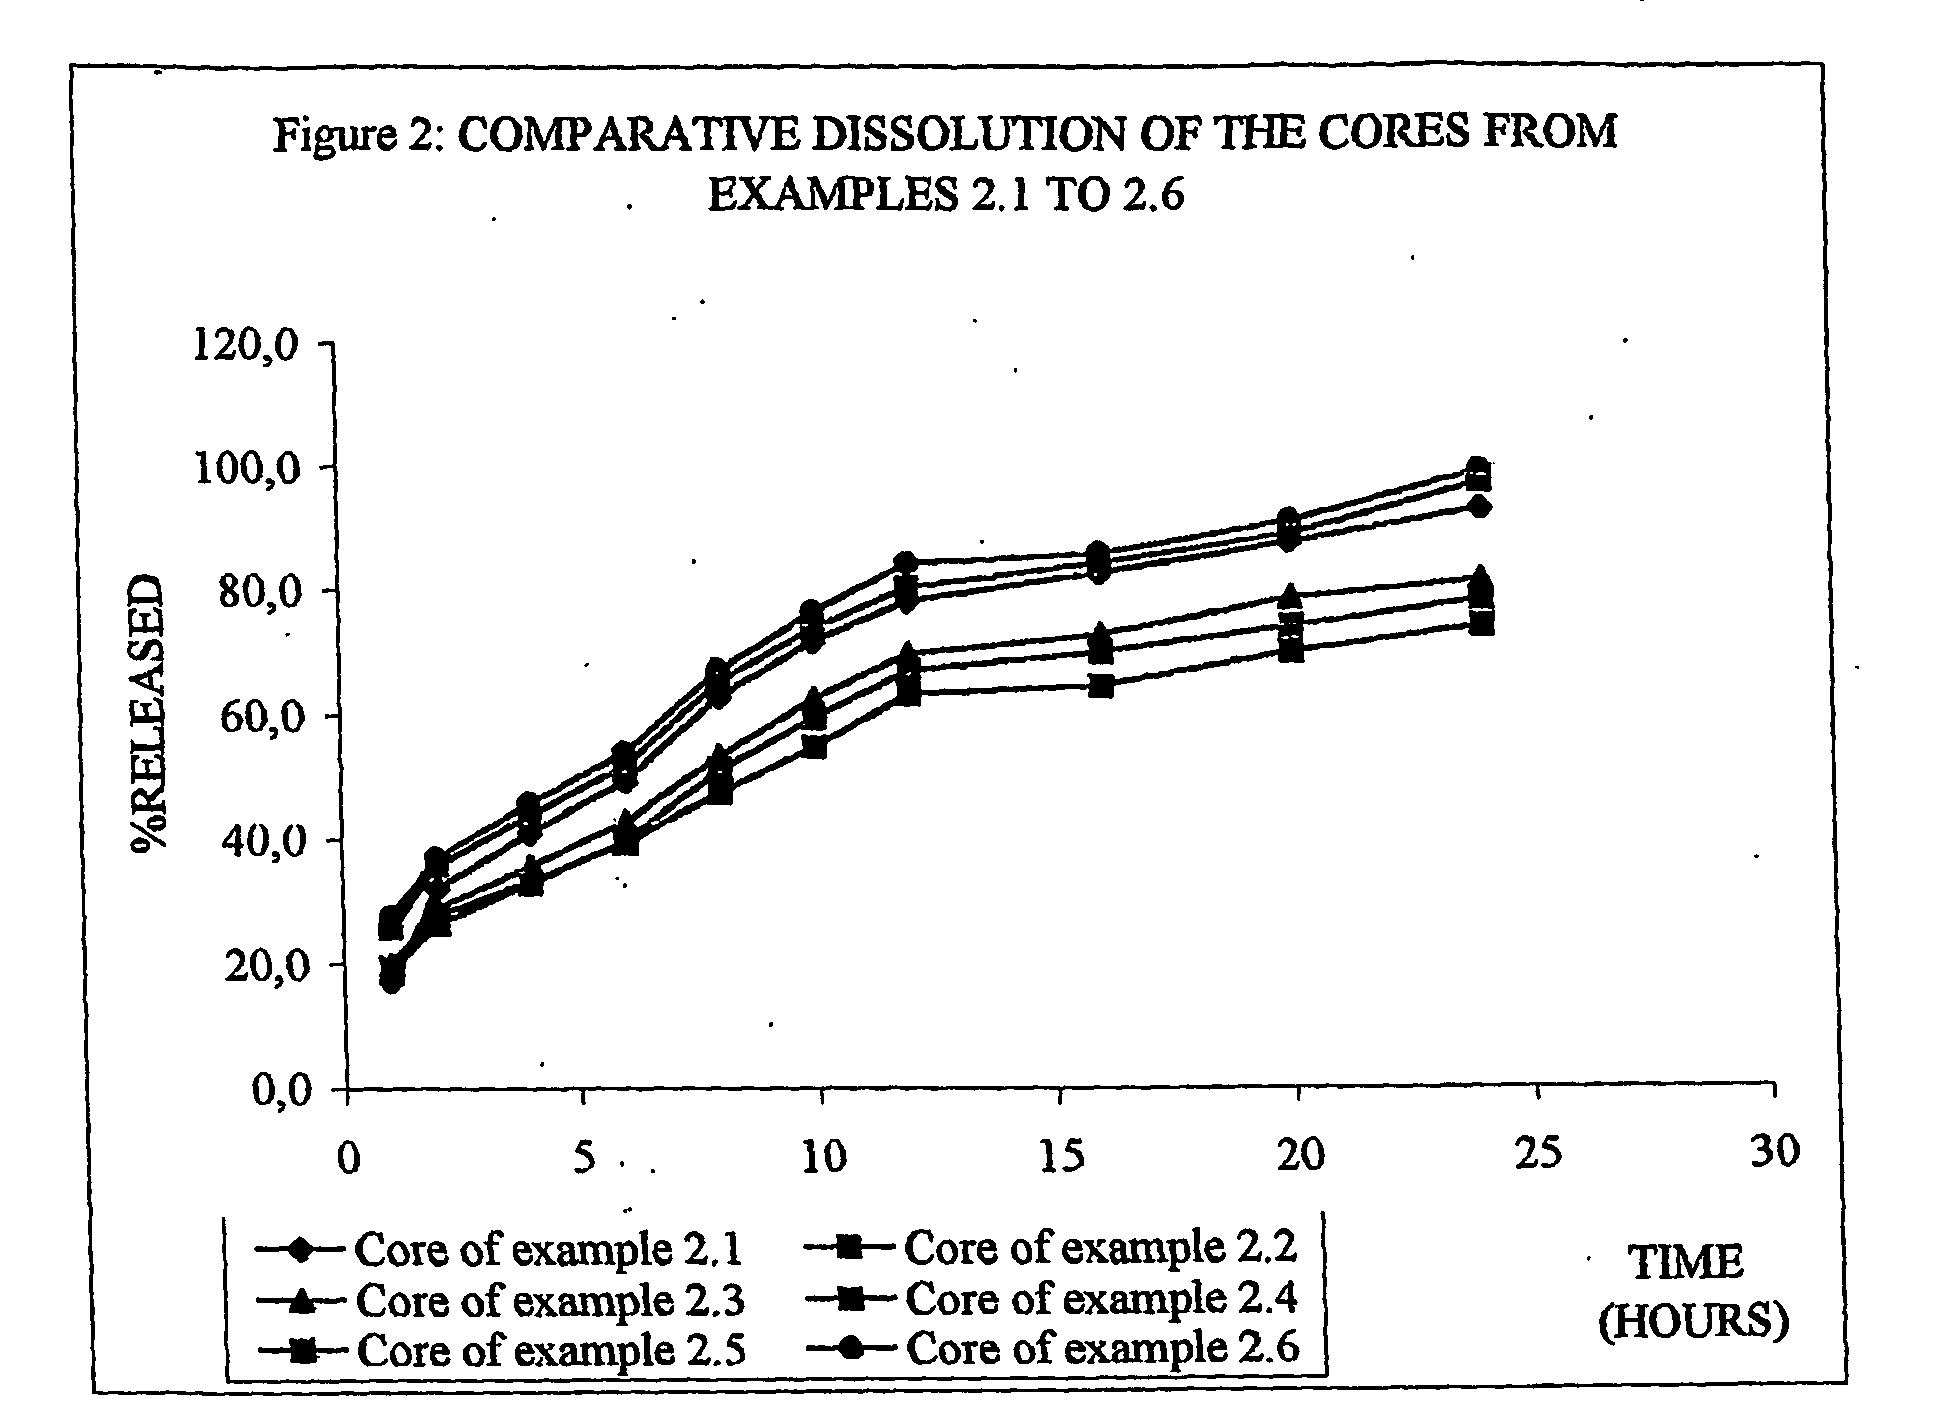 Sutained release formulation for venlafaxine hydrochloride